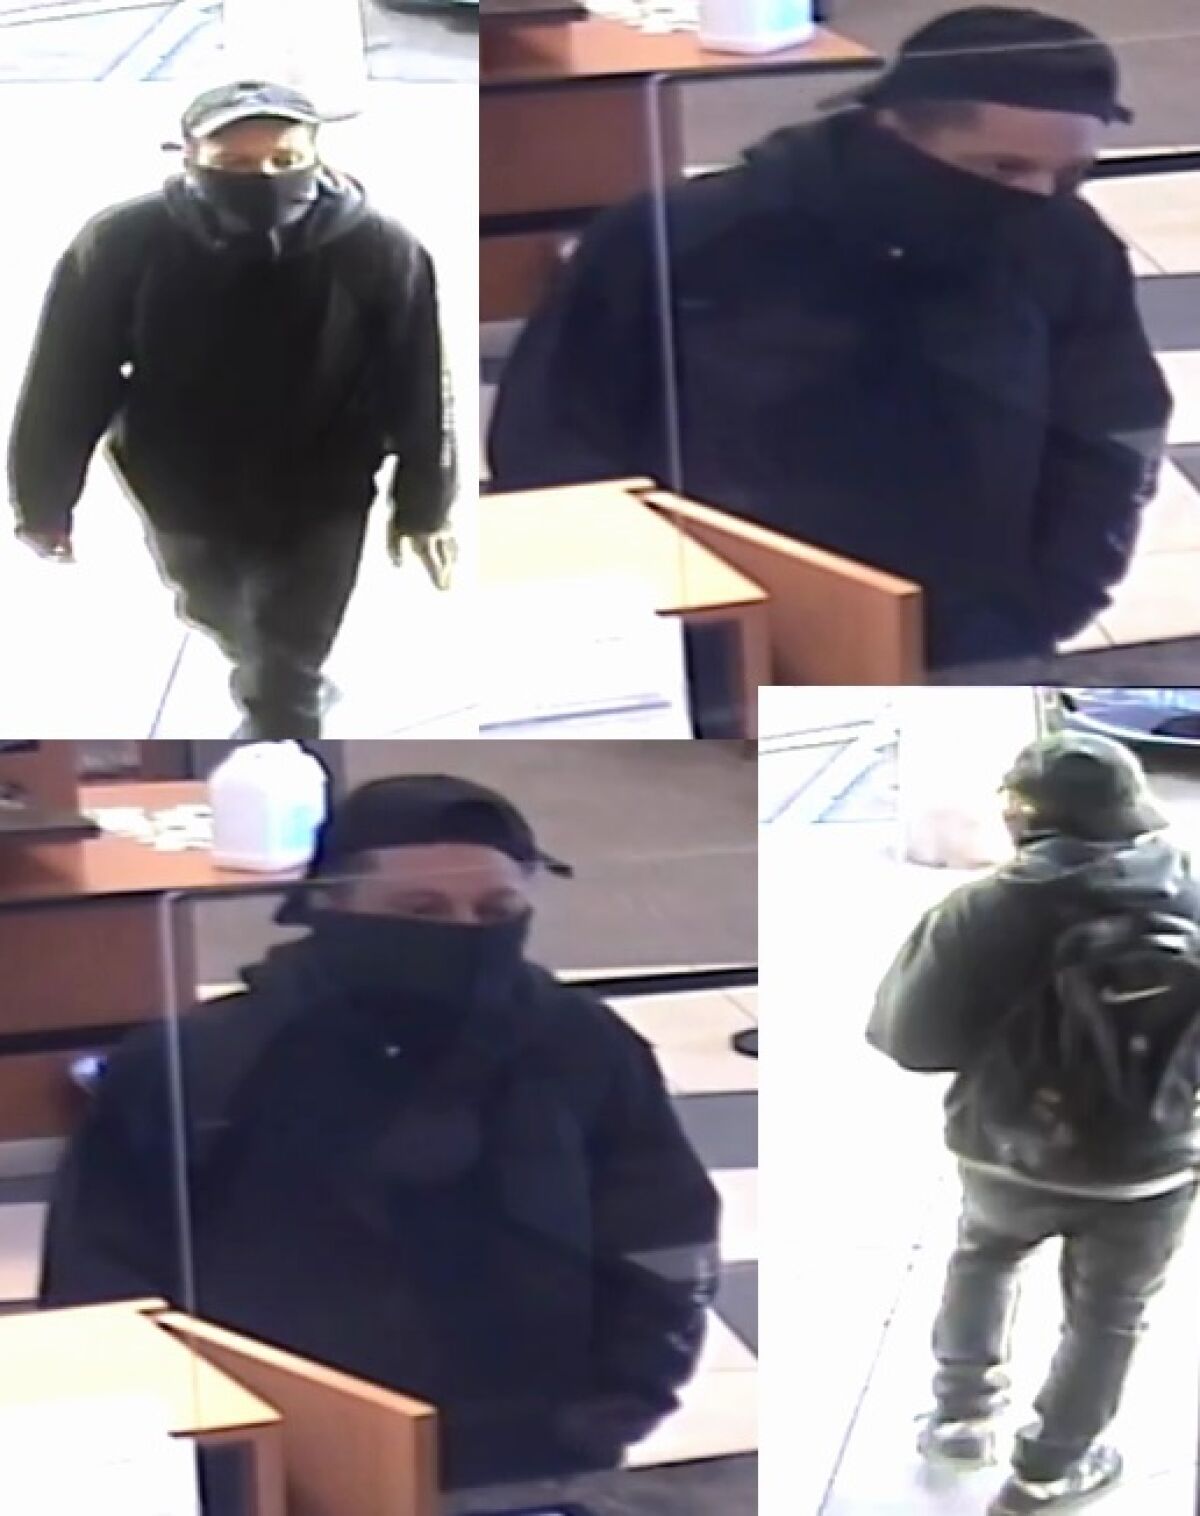 This man is suspected of robbing a teller Friday morning at a San Diego County Credit Union in Mission Valley.